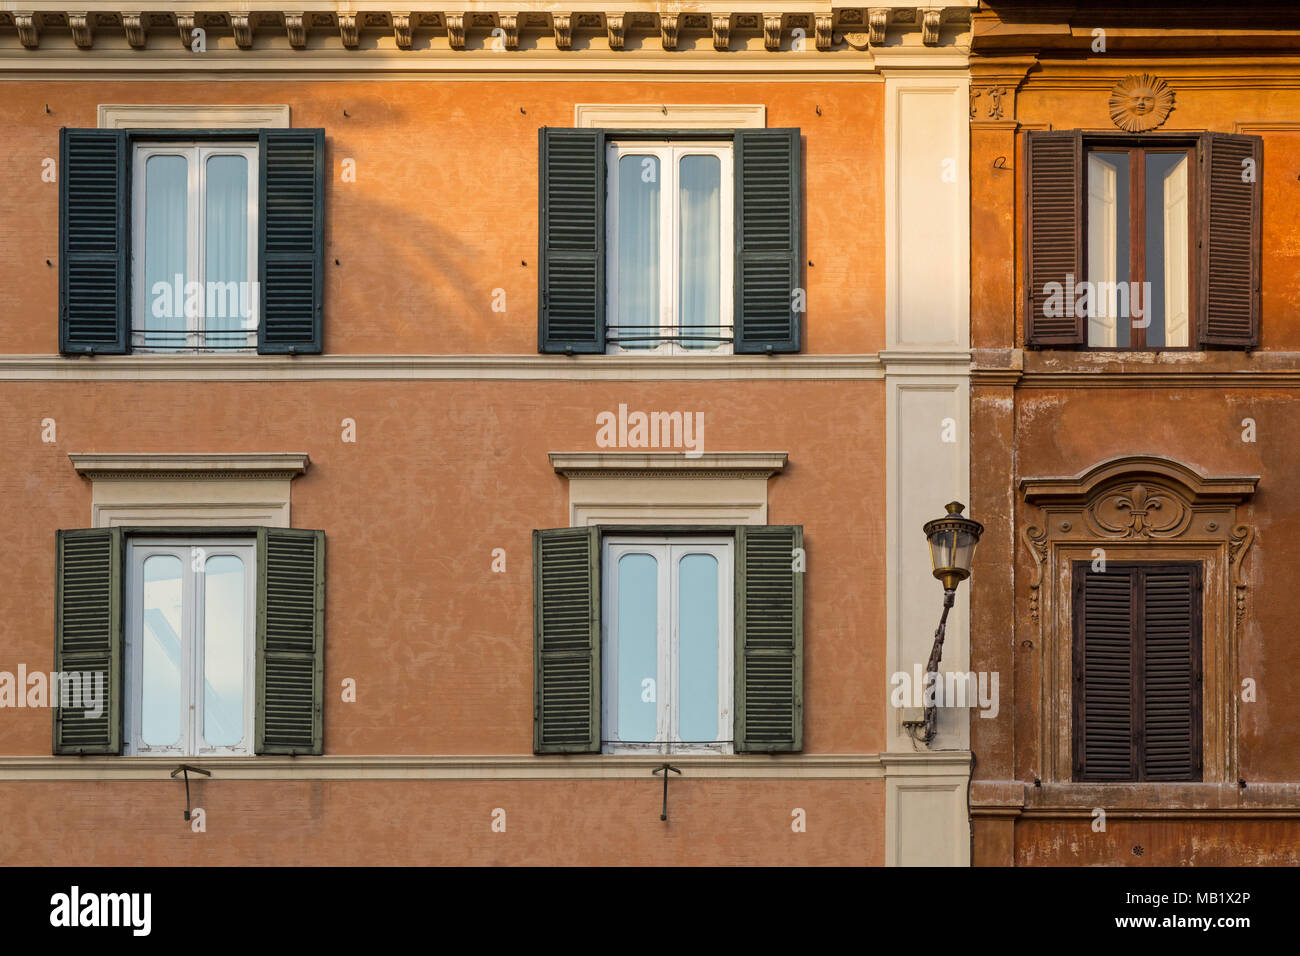 An ornate sun plaque above one of the windows on a building in Rome, Italy, as it catches the last of the days sunlight. Stock Photo